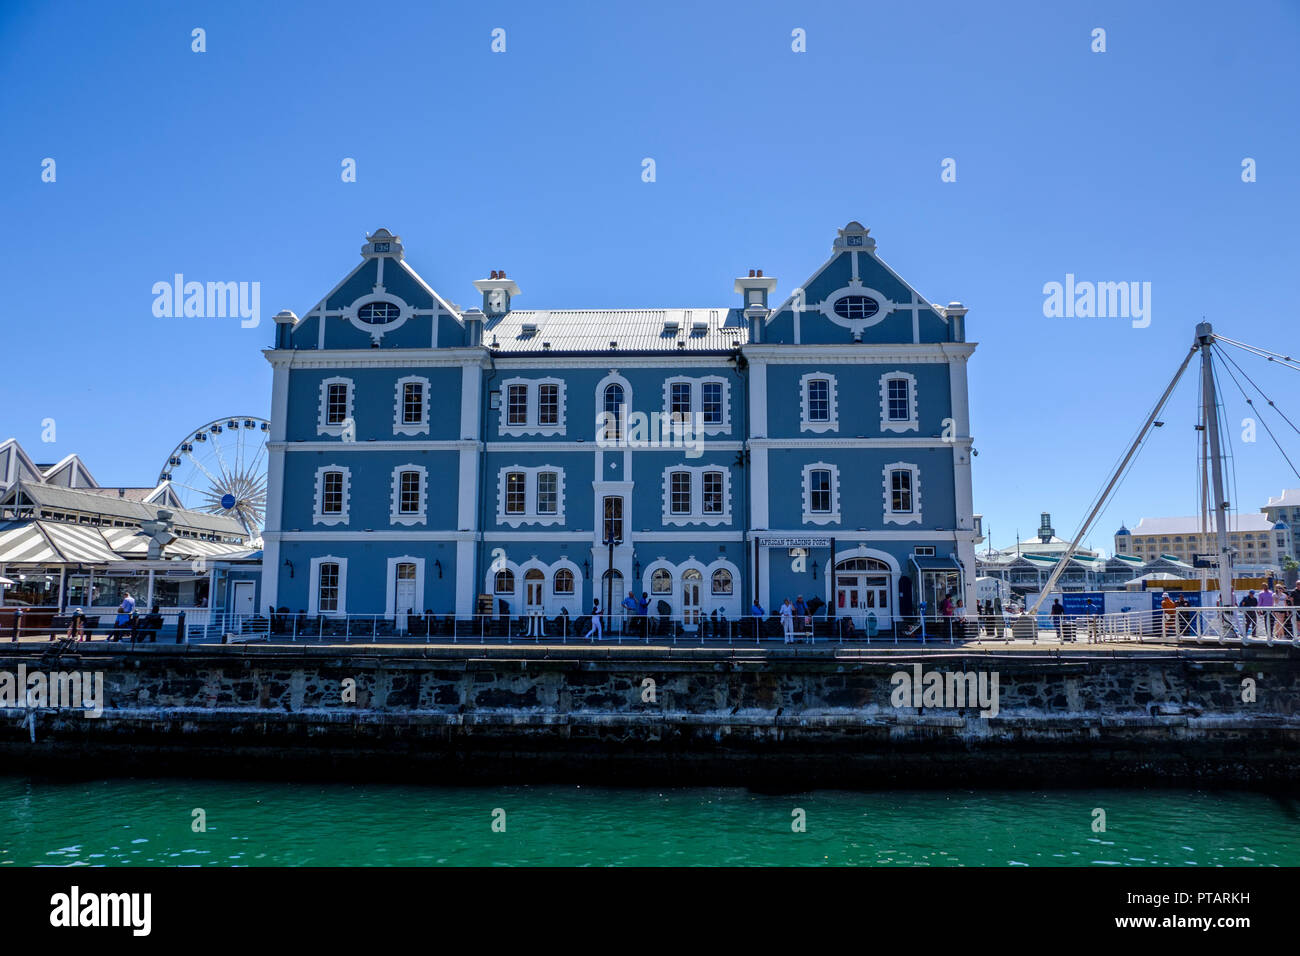 CAPE TOWN, SOUTH AFRICA – 20 MARCH 2018: Beautiful blue and white African Trading Port building at Cape Town's V & A Waterfront against clear blue sky Stock Photo